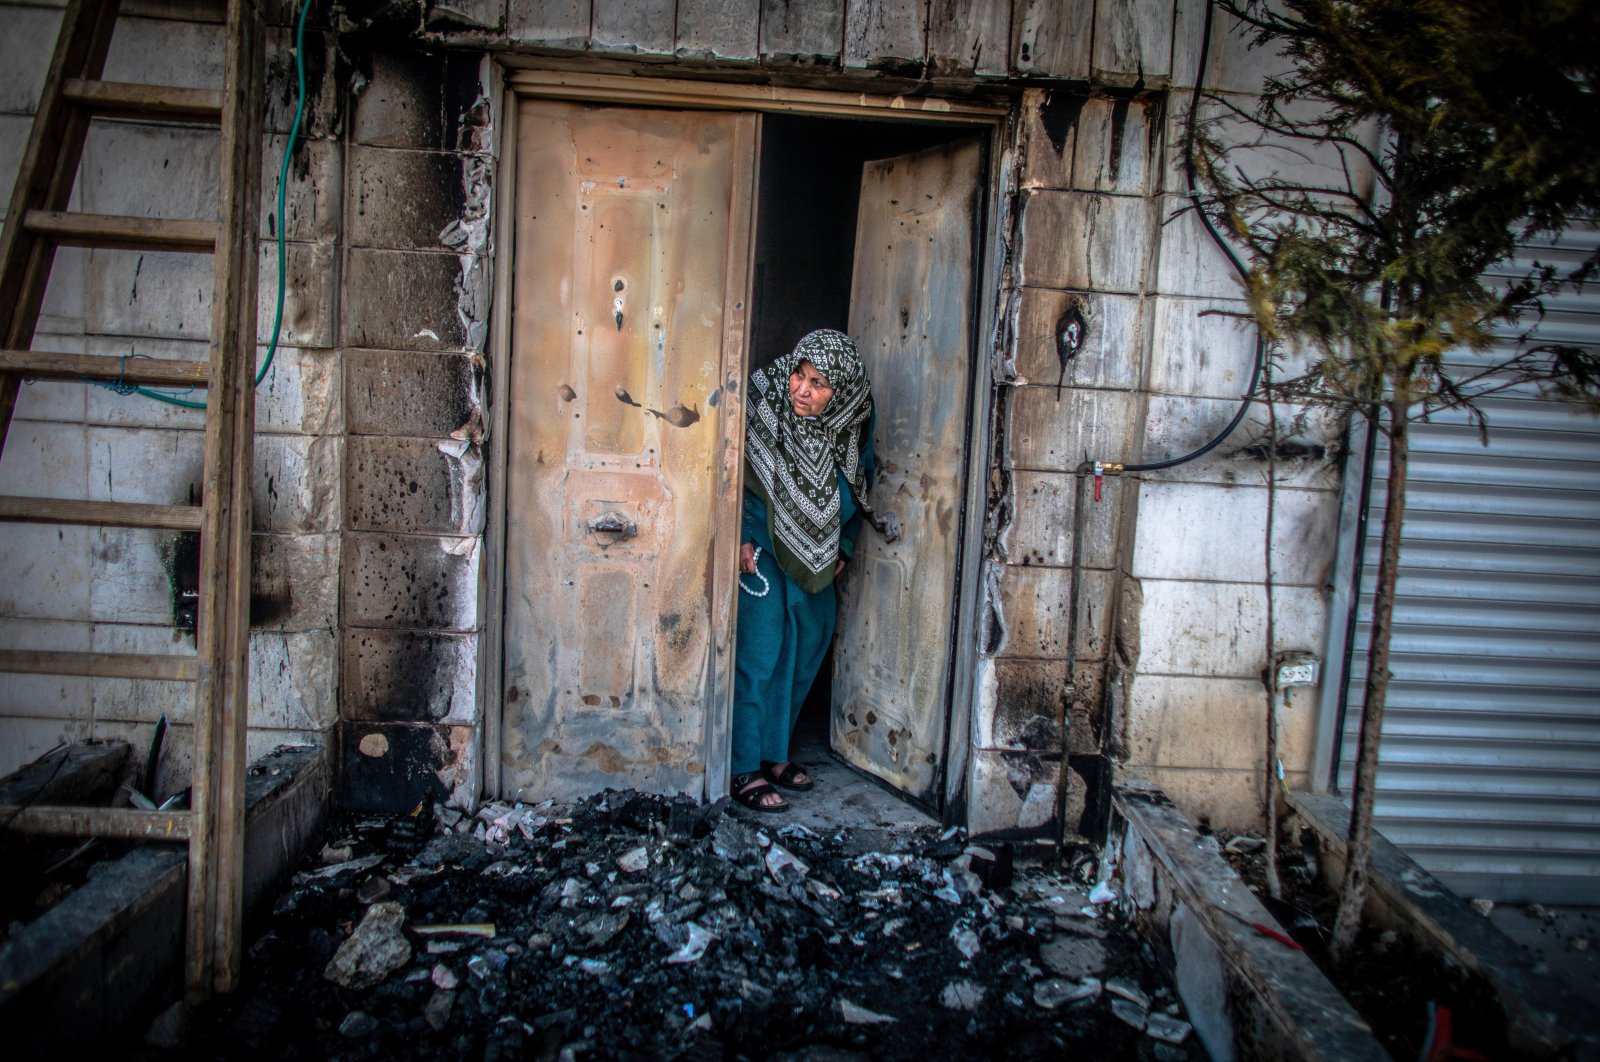 A Palestinian woman looks outside her door that was torched by Jewish settlers in the West Bank town of Huwara, occupied Palestine, Feb. 28, 2023. (Getty Images Photo)